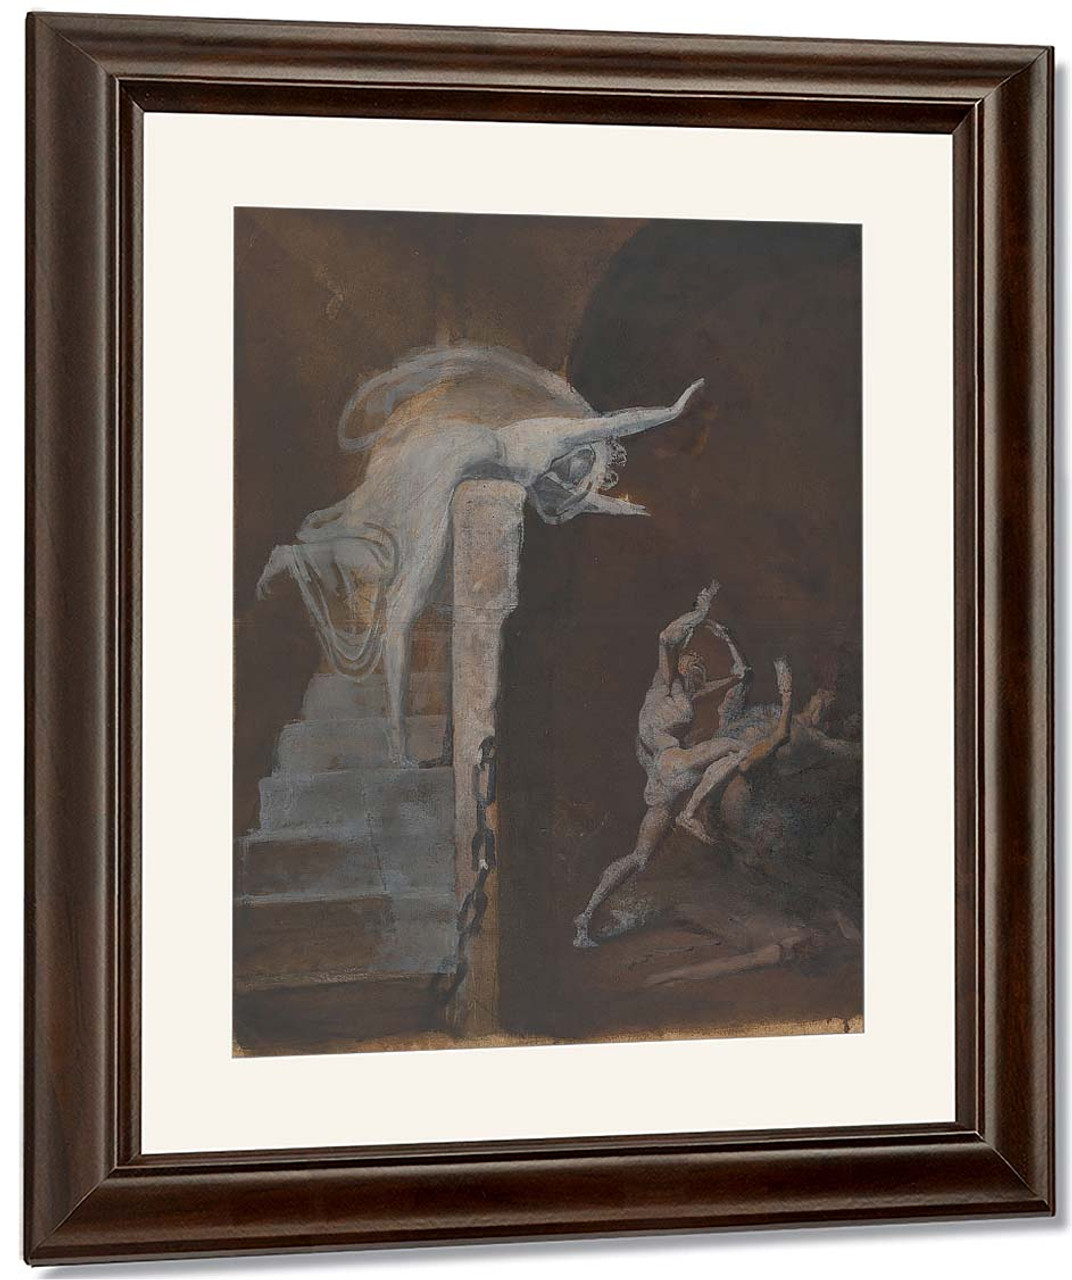 theseus and the minotaur painting